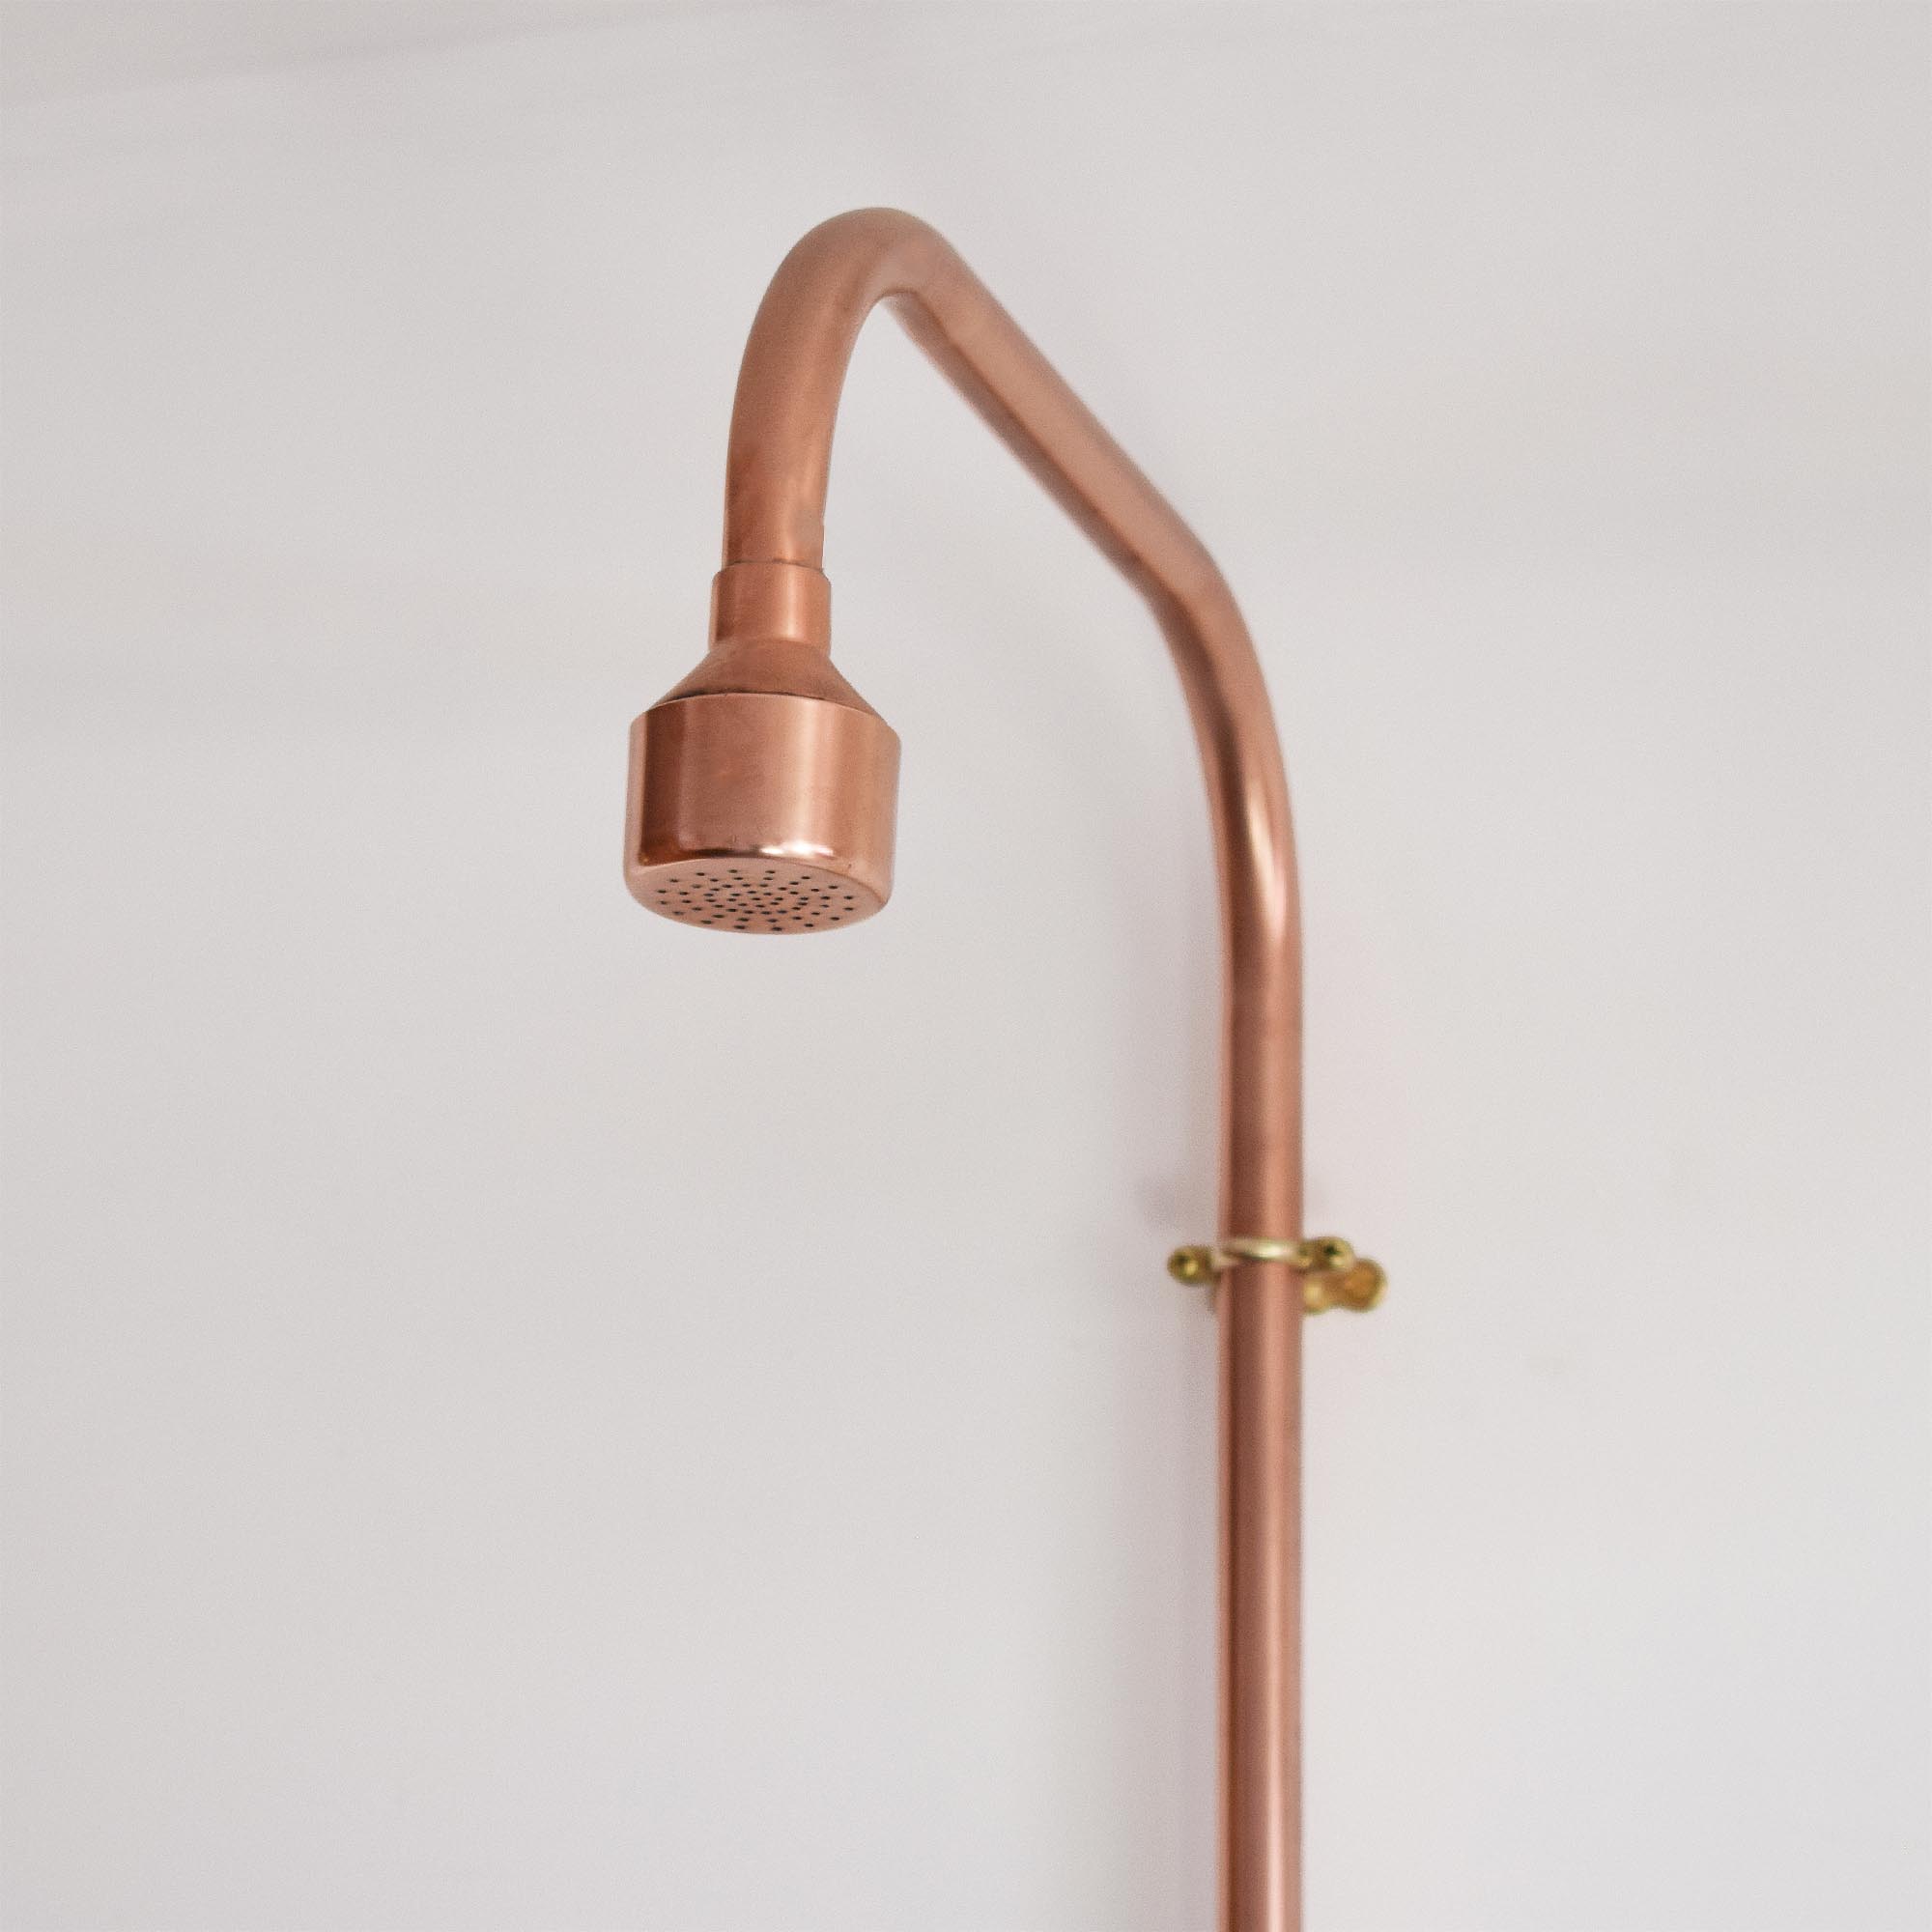 handmade copper shower head for a massaging outdoor showering experience 